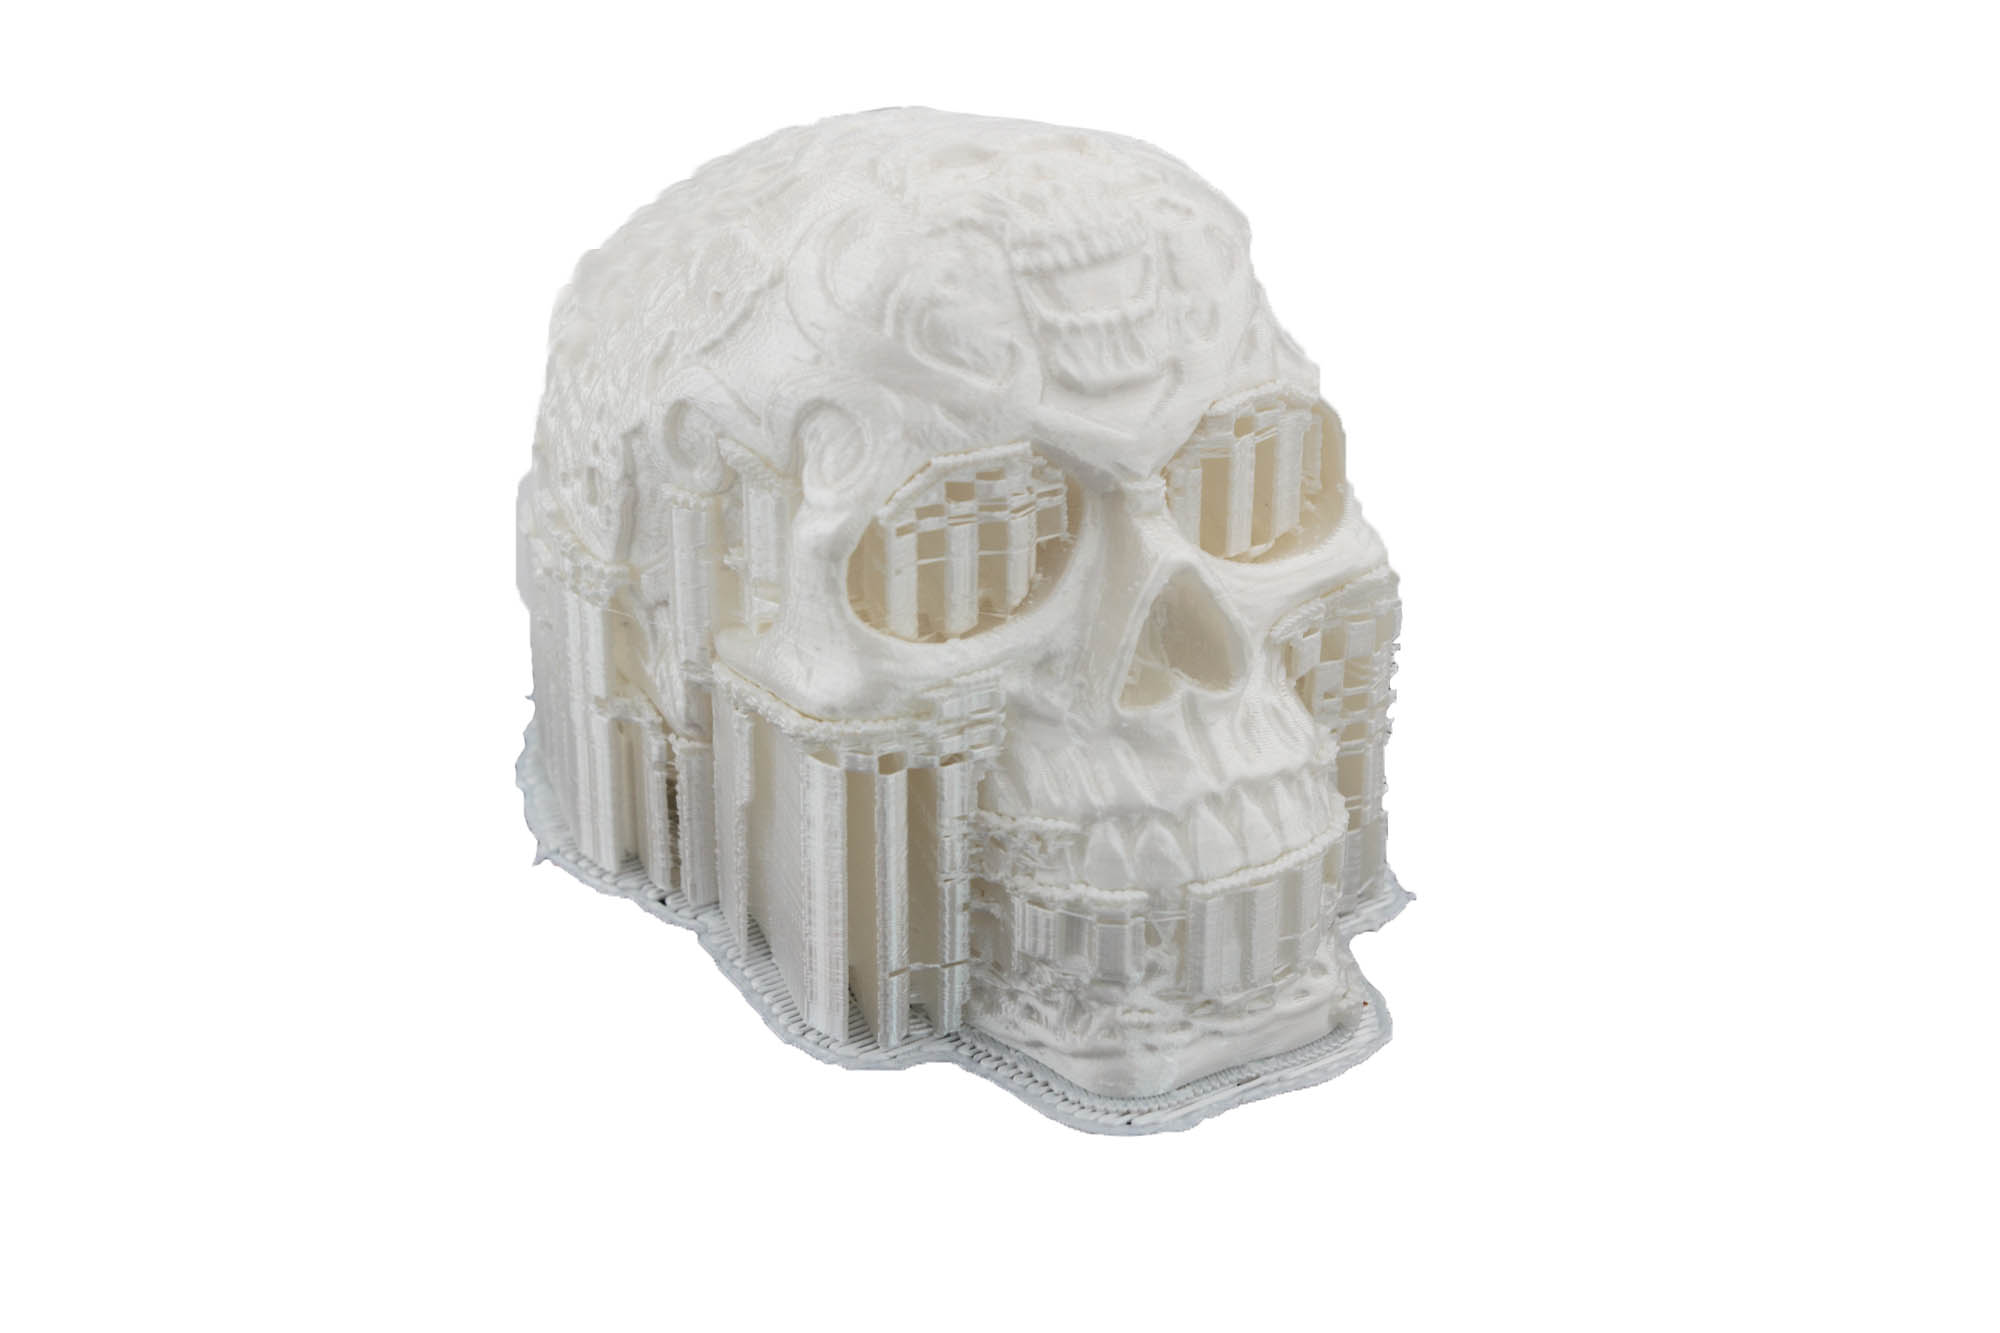 Celtic Skull with support